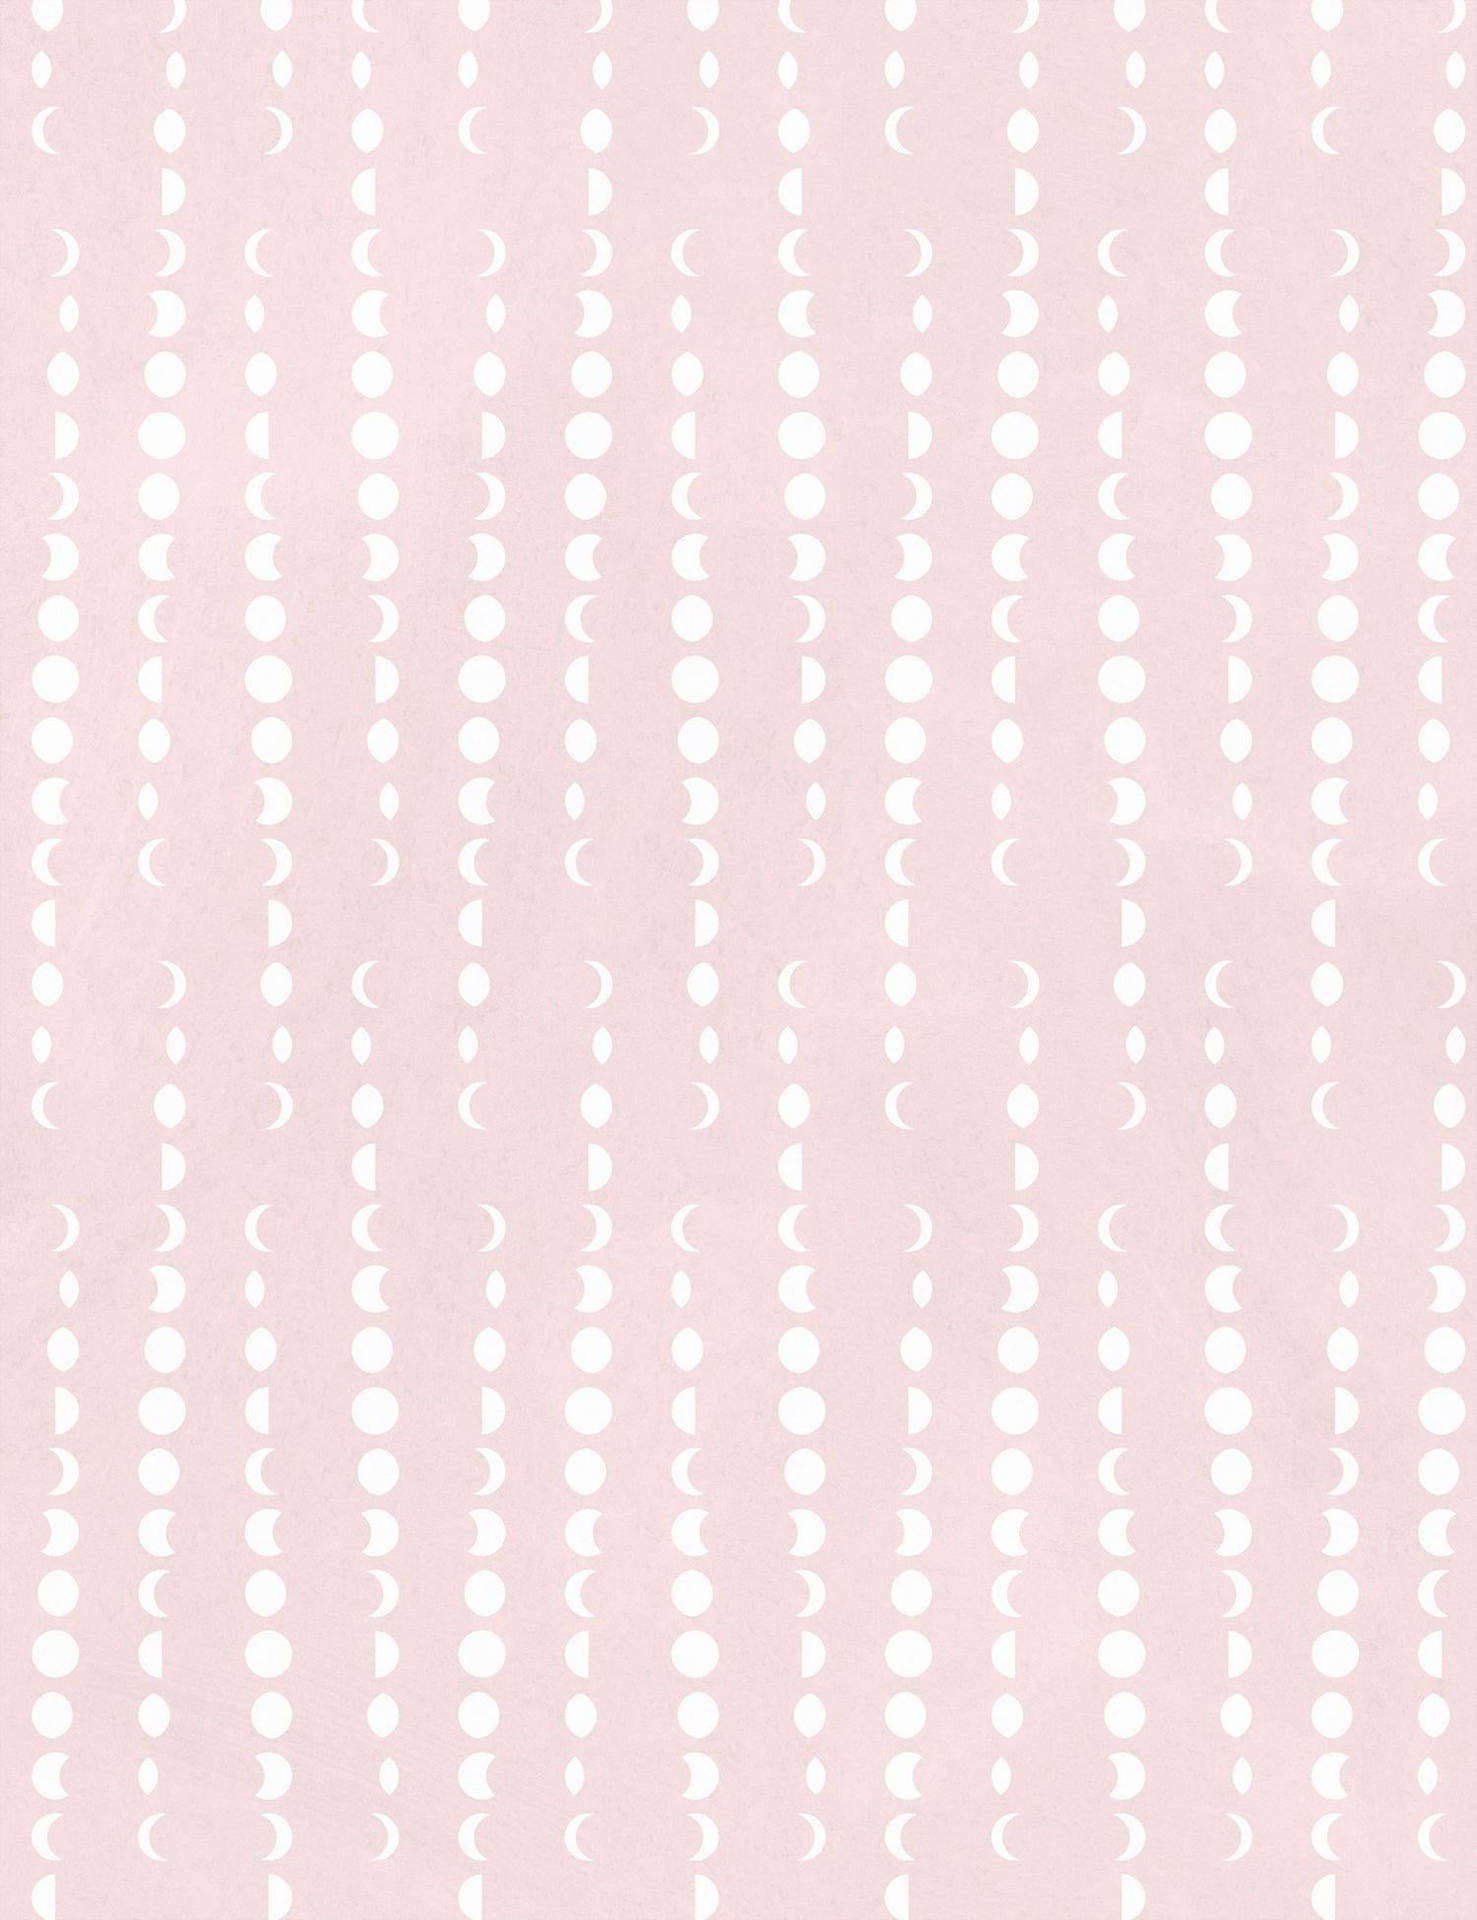 Moon Phases Plain Pink Wallpaper